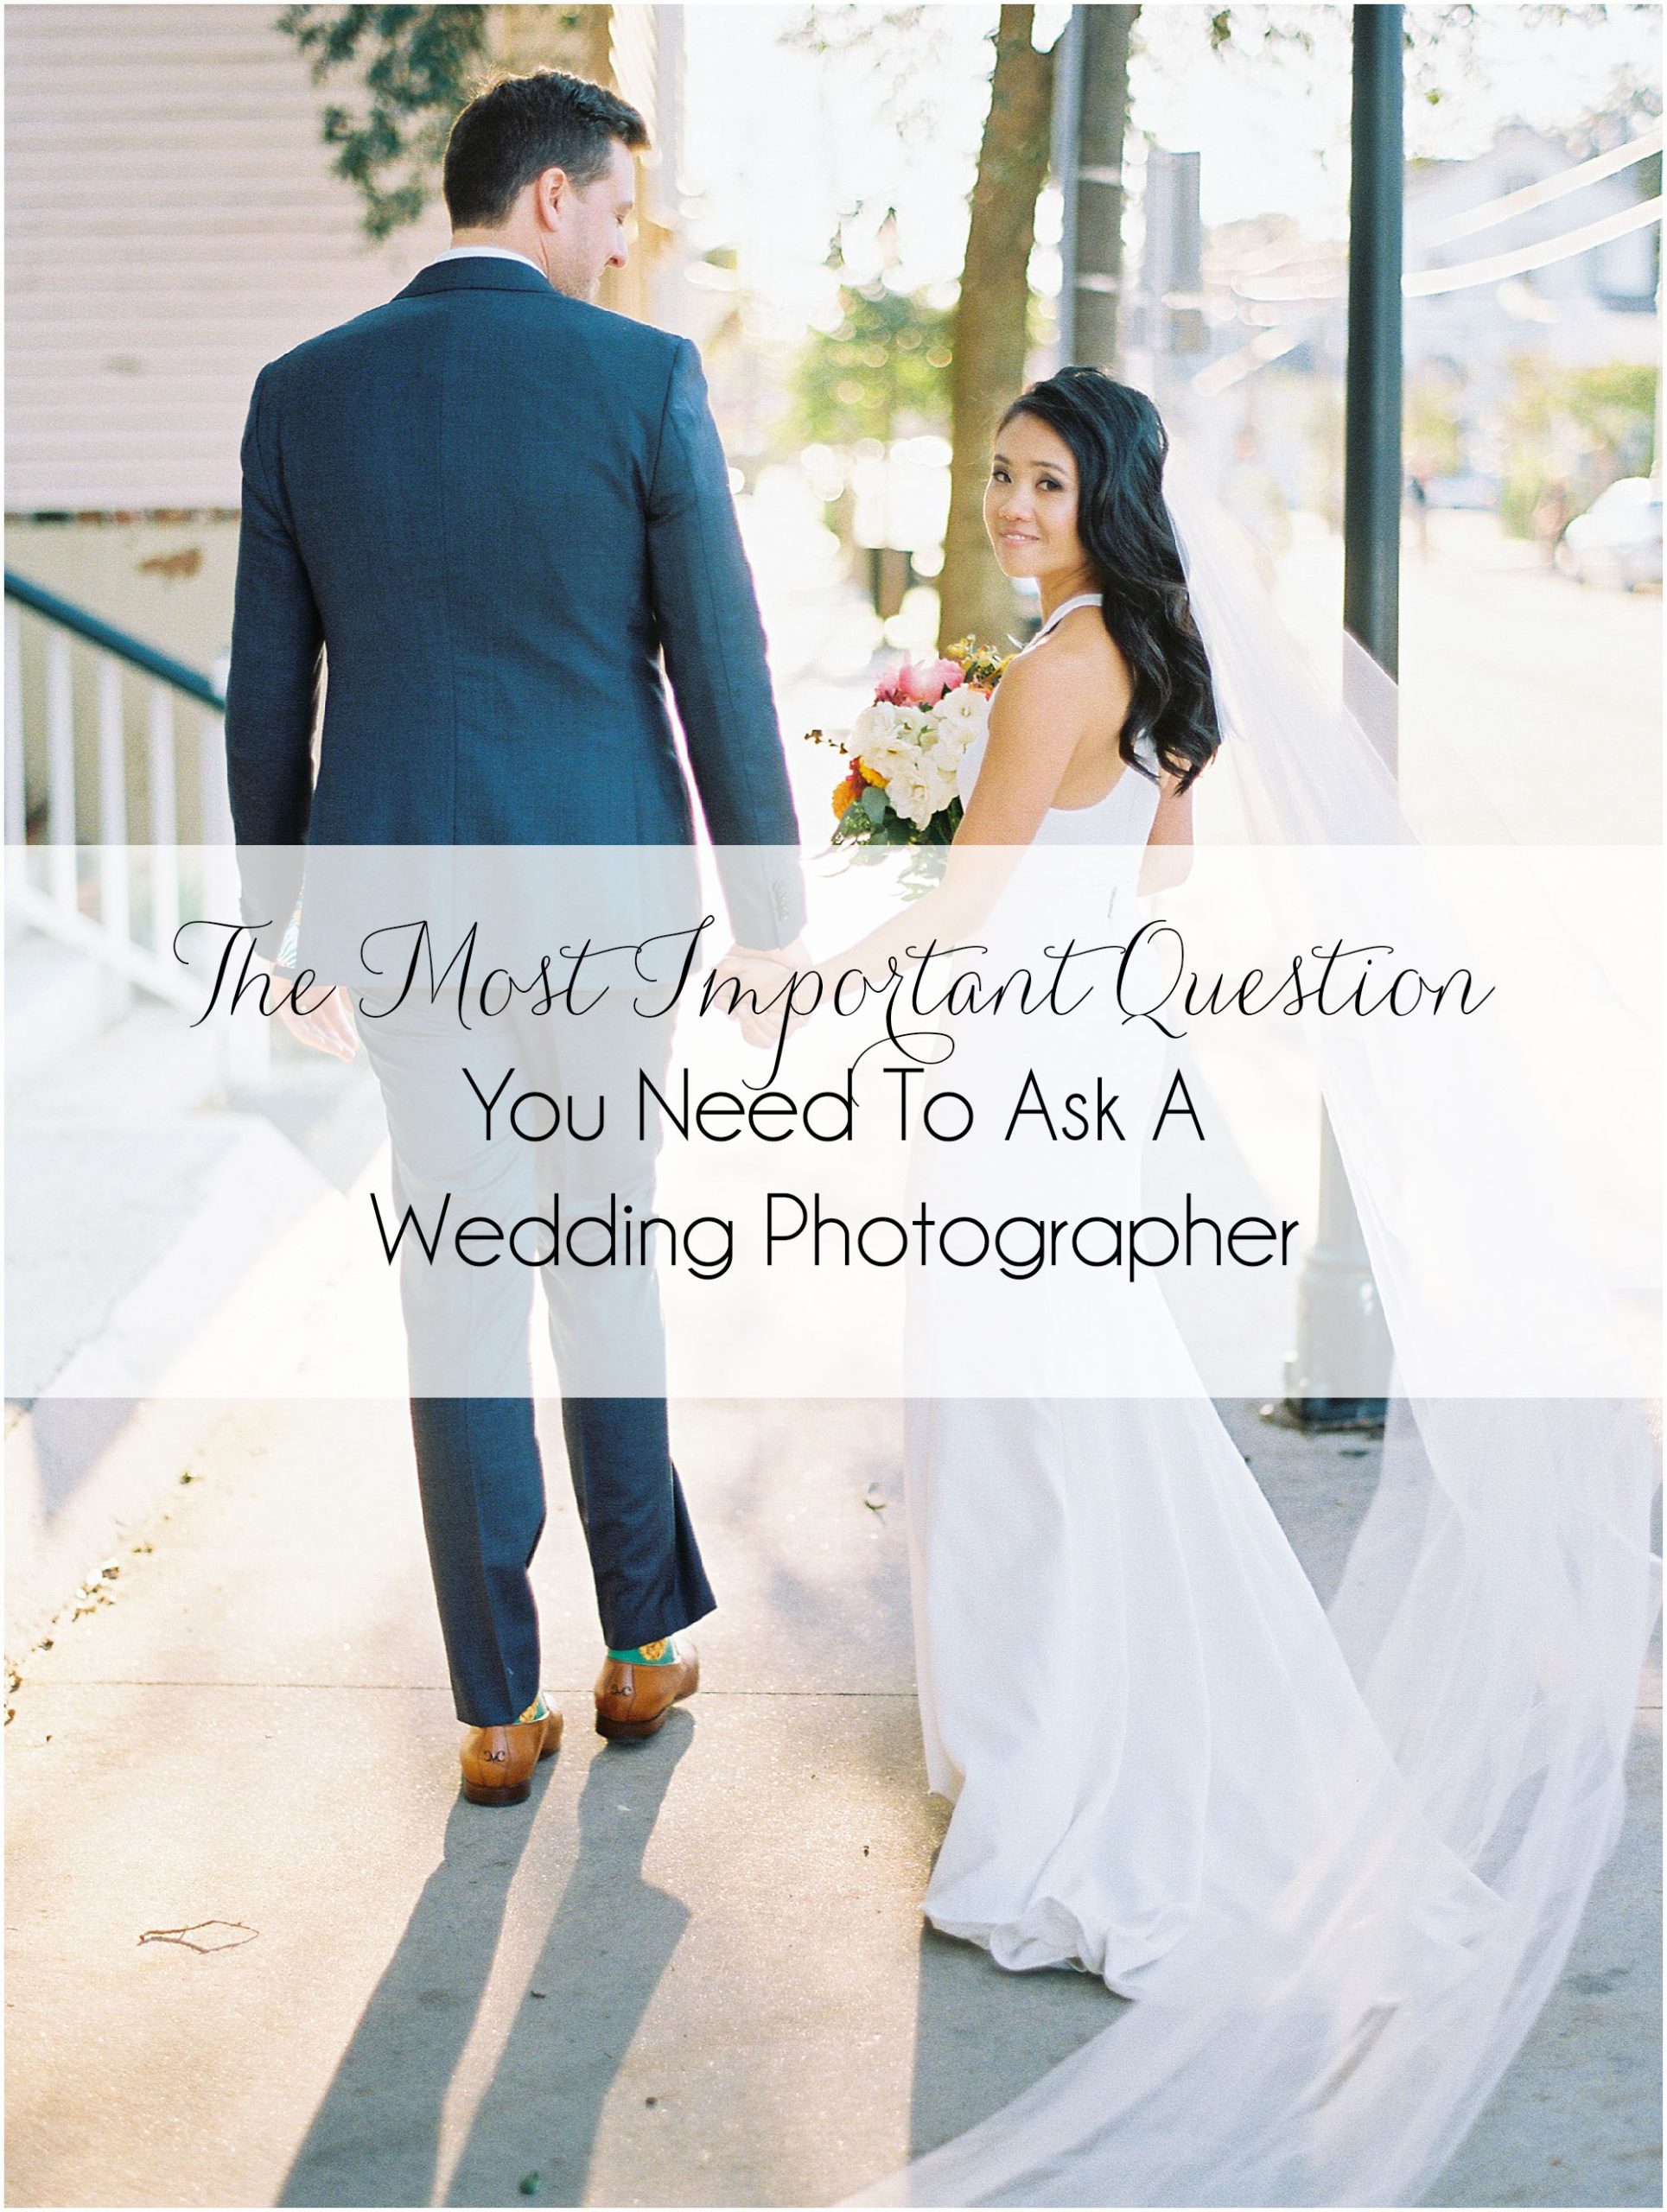 The only question to ask your wedding photographer